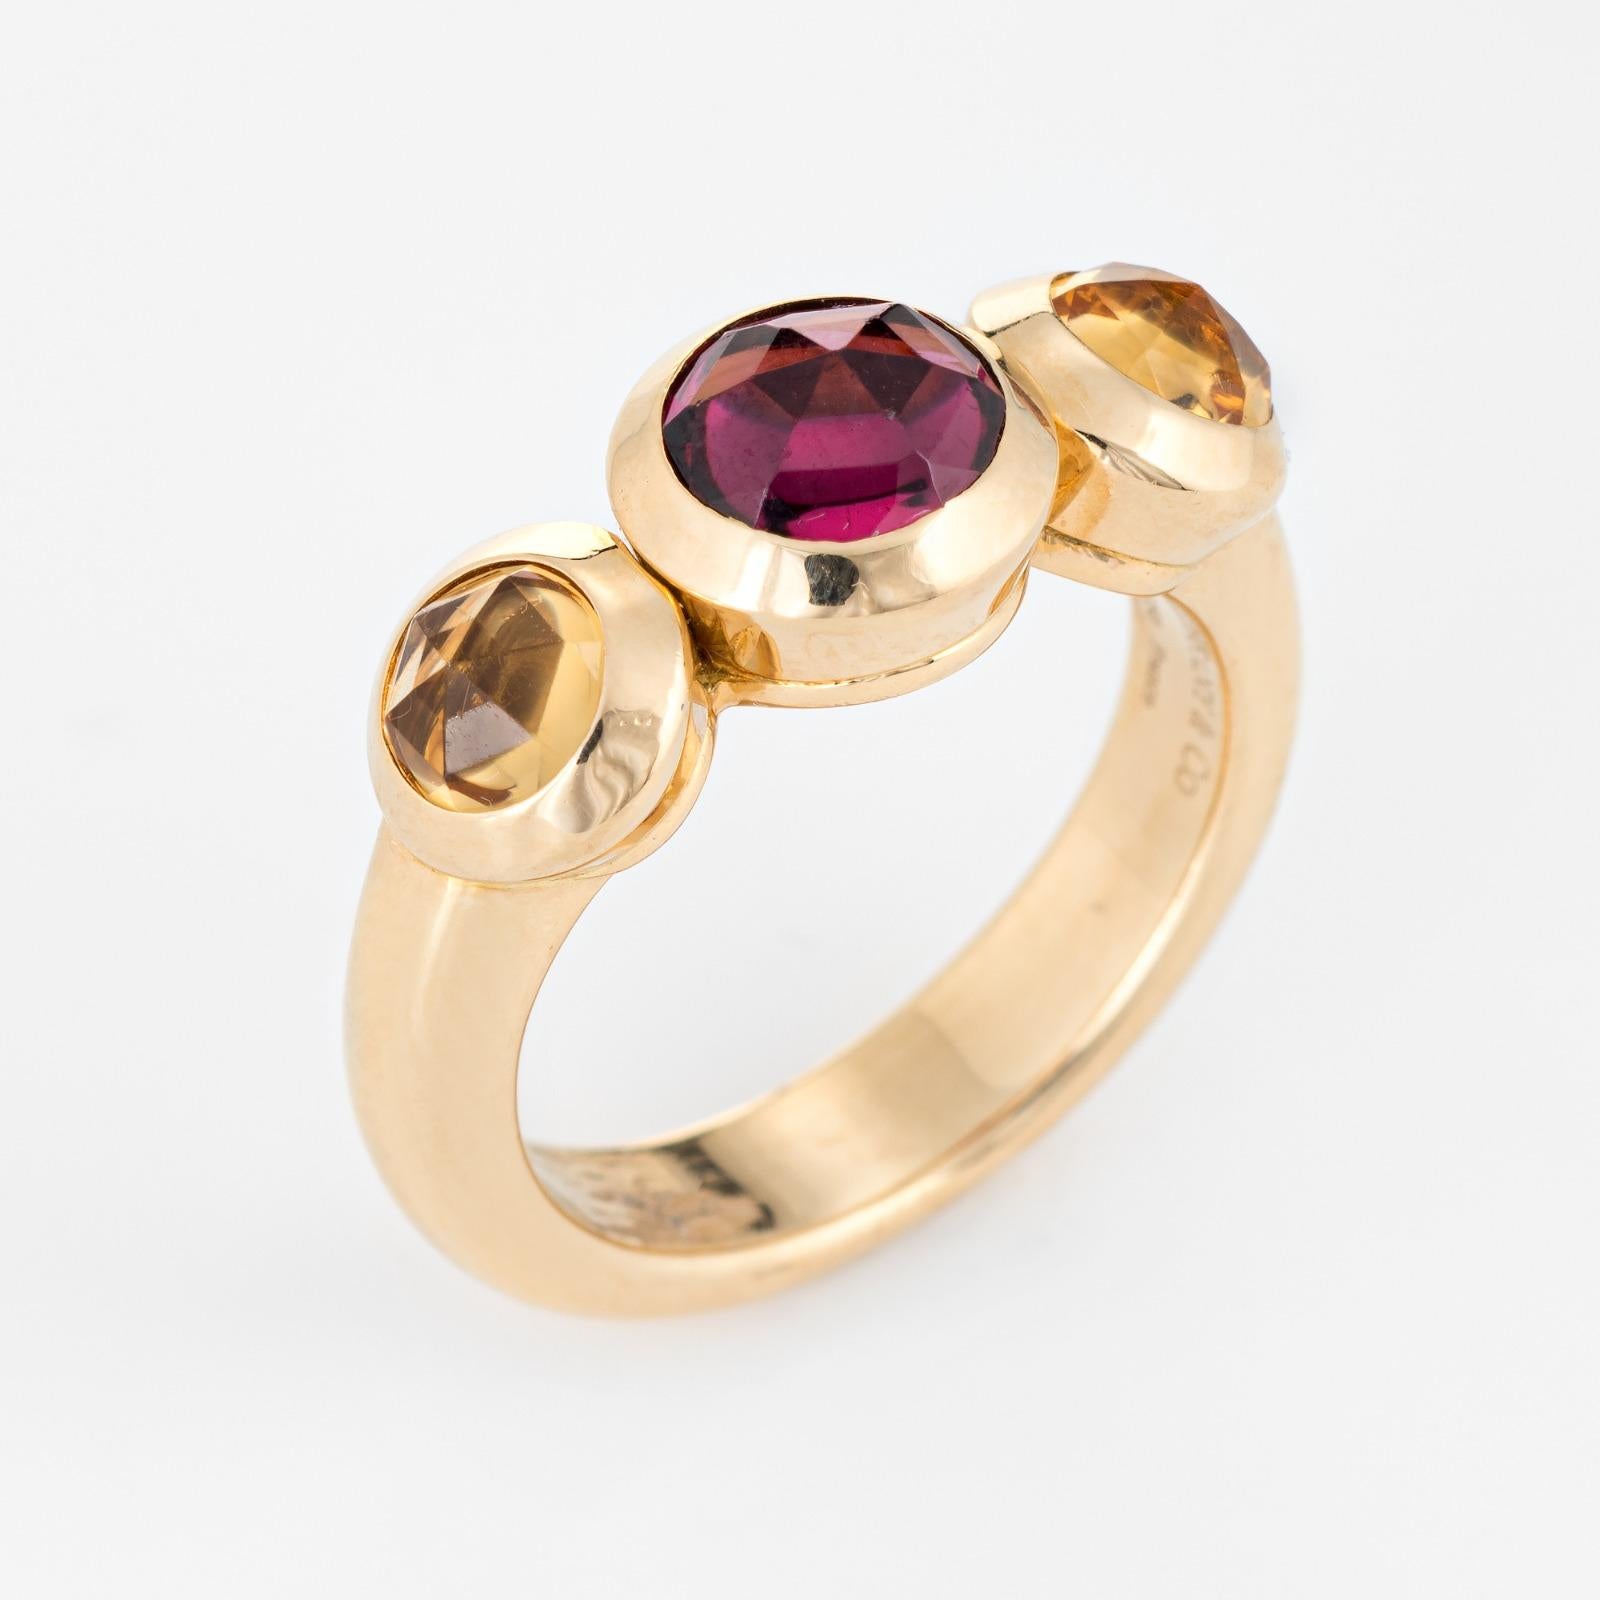 Estate Tiffany & Co garnet & citrine ring crafted in 18 karat yellow gold (circa 1990s to 2000s).  

Faceted garnet measures 6mm, flanked with two citrines that measure 4mm each. The stones are is in excellent condition and free of cracks or